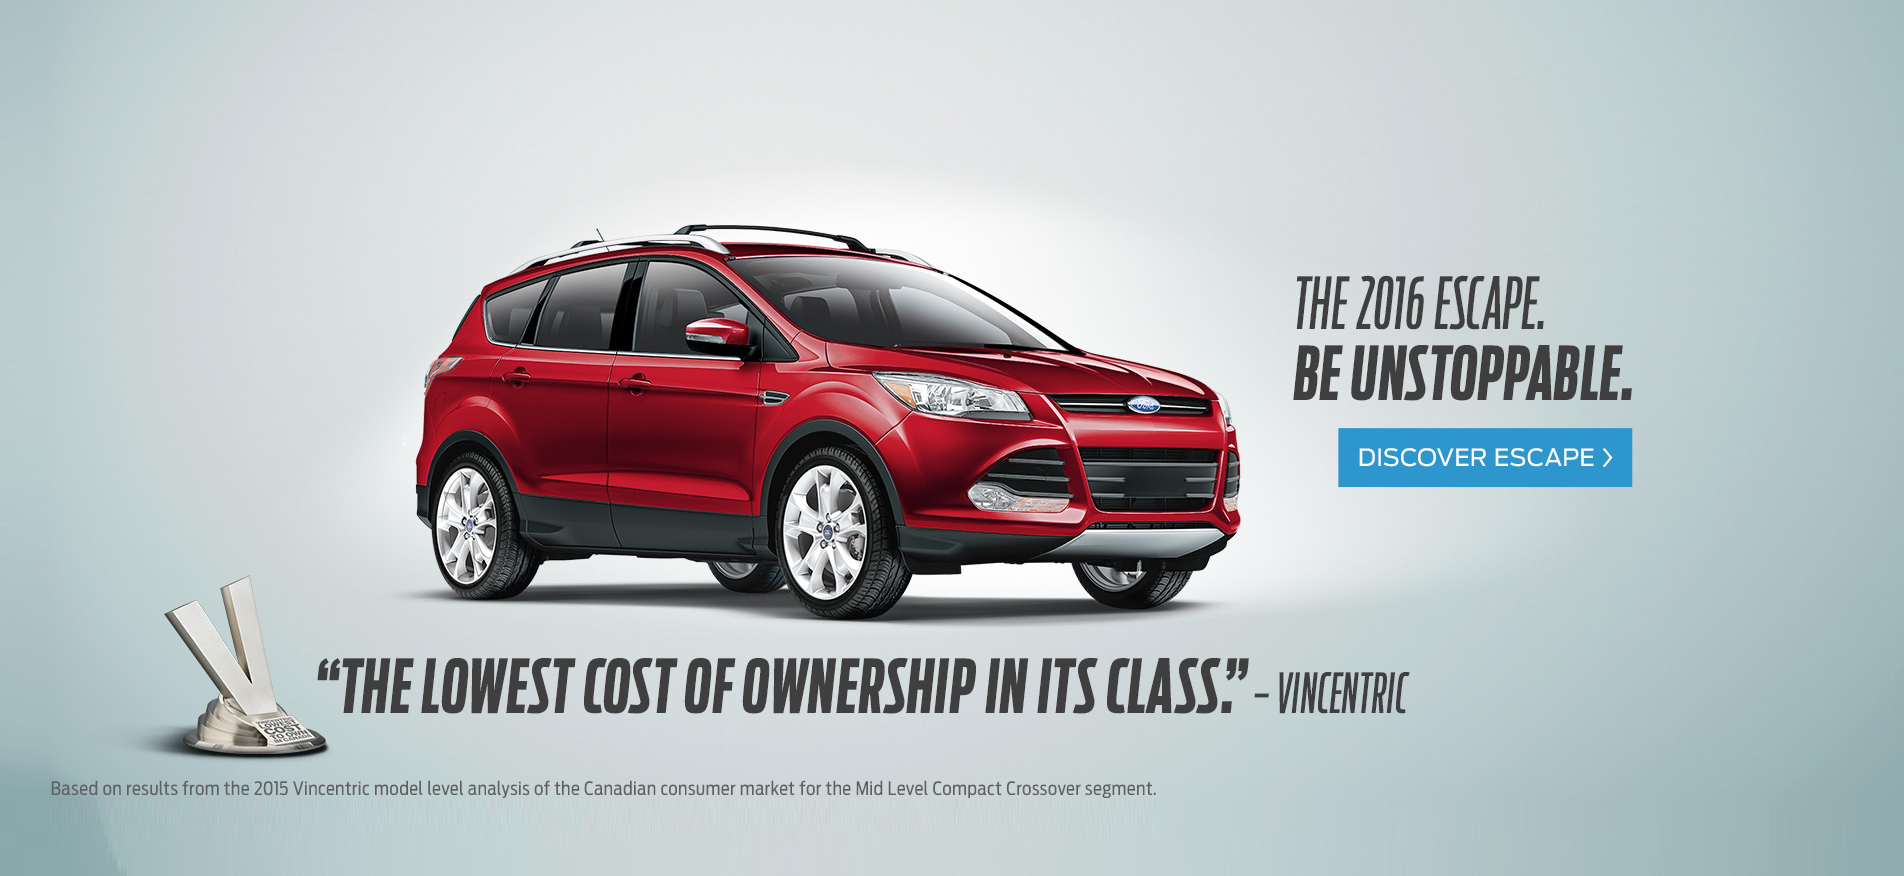 Brant county ford used cars #1